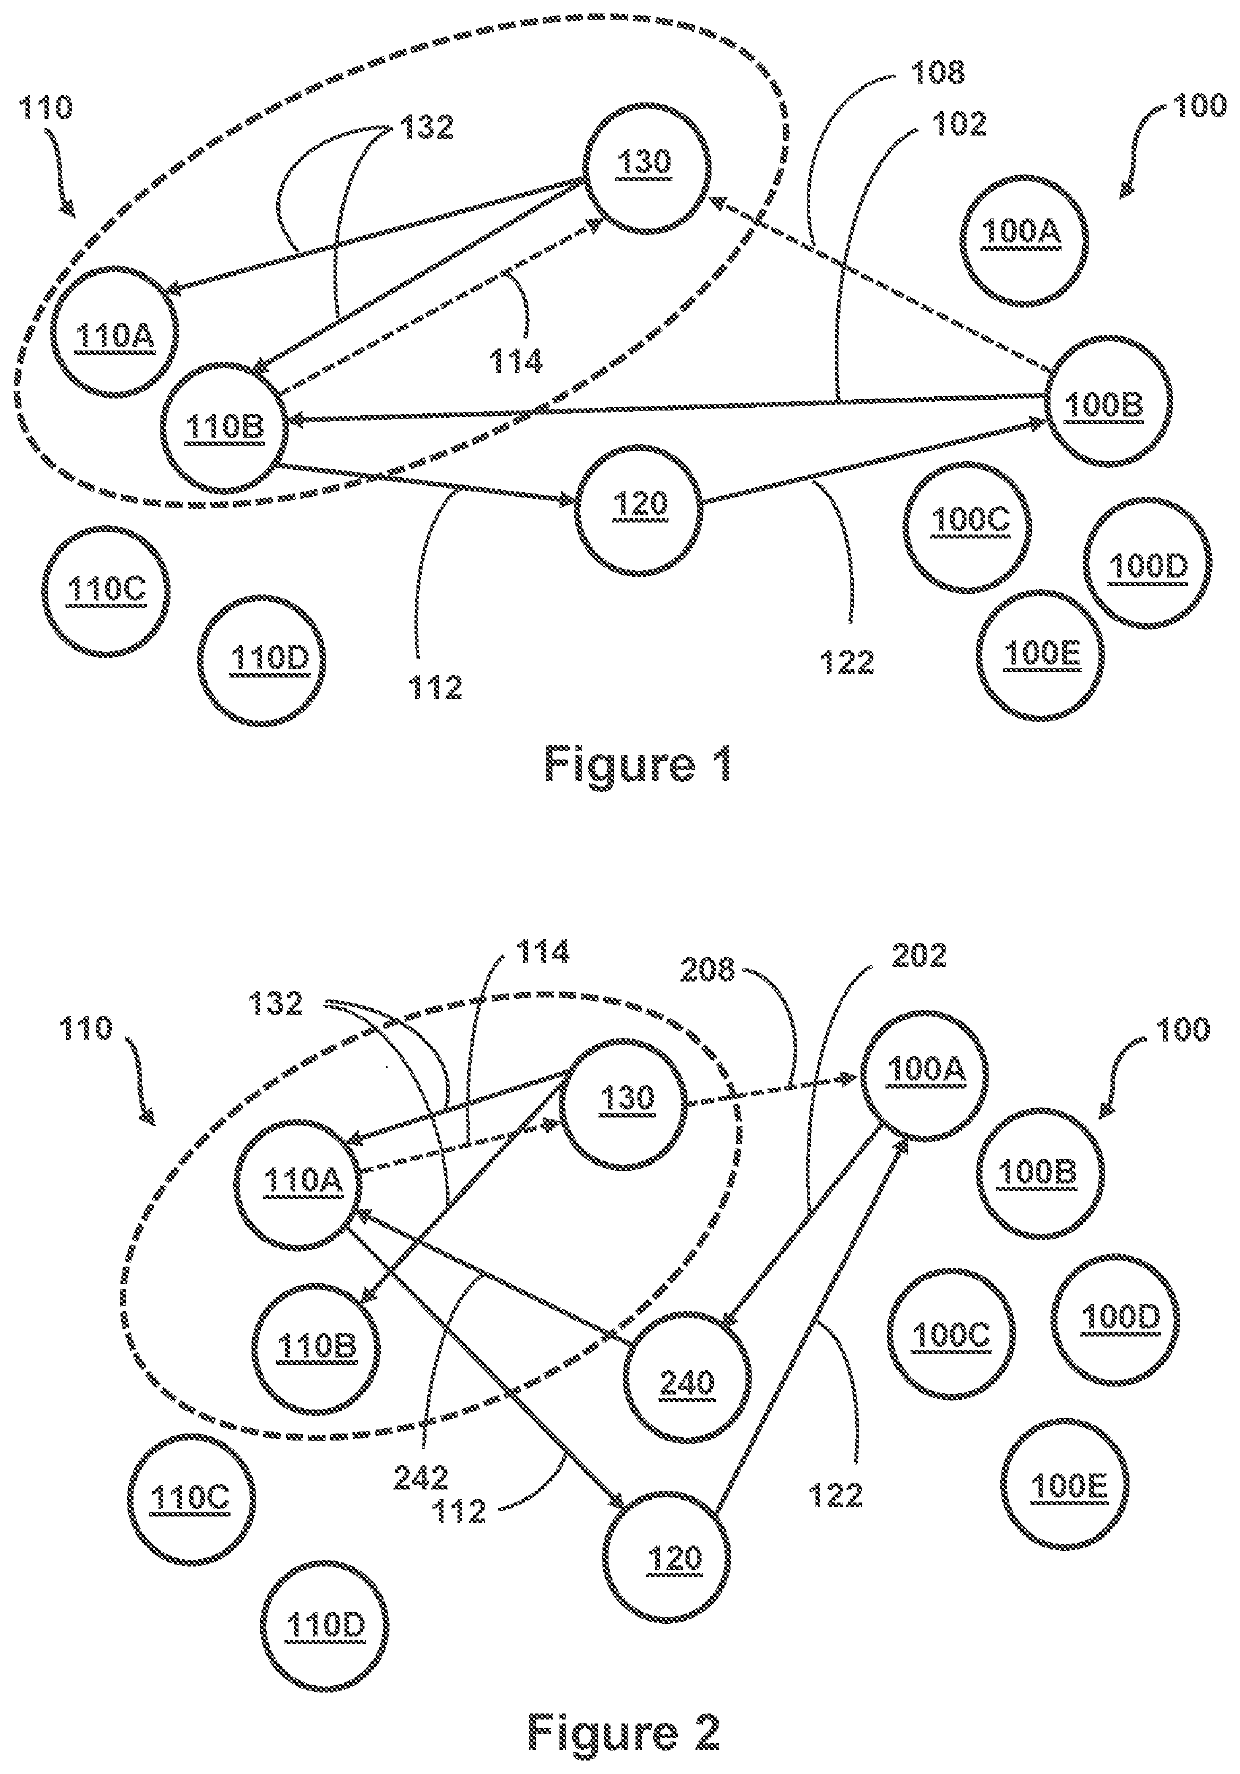 System, Method, And Packaging For Secure Food Delivery